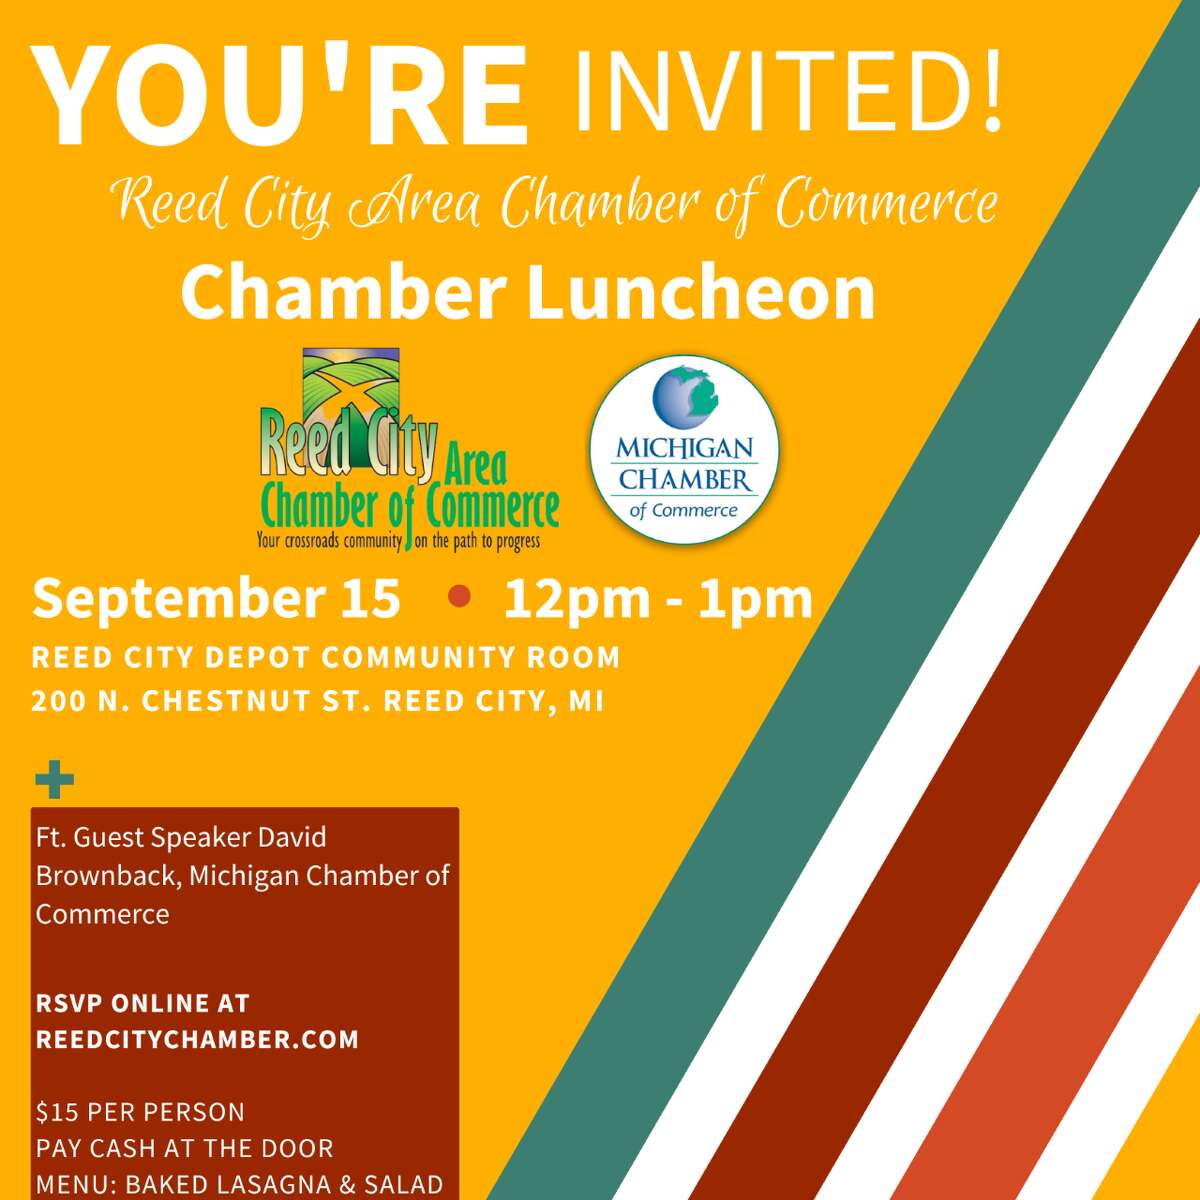 The Reed City Chamber of Commerce is having a luncheon with the Michigan Chamber of Commerce.